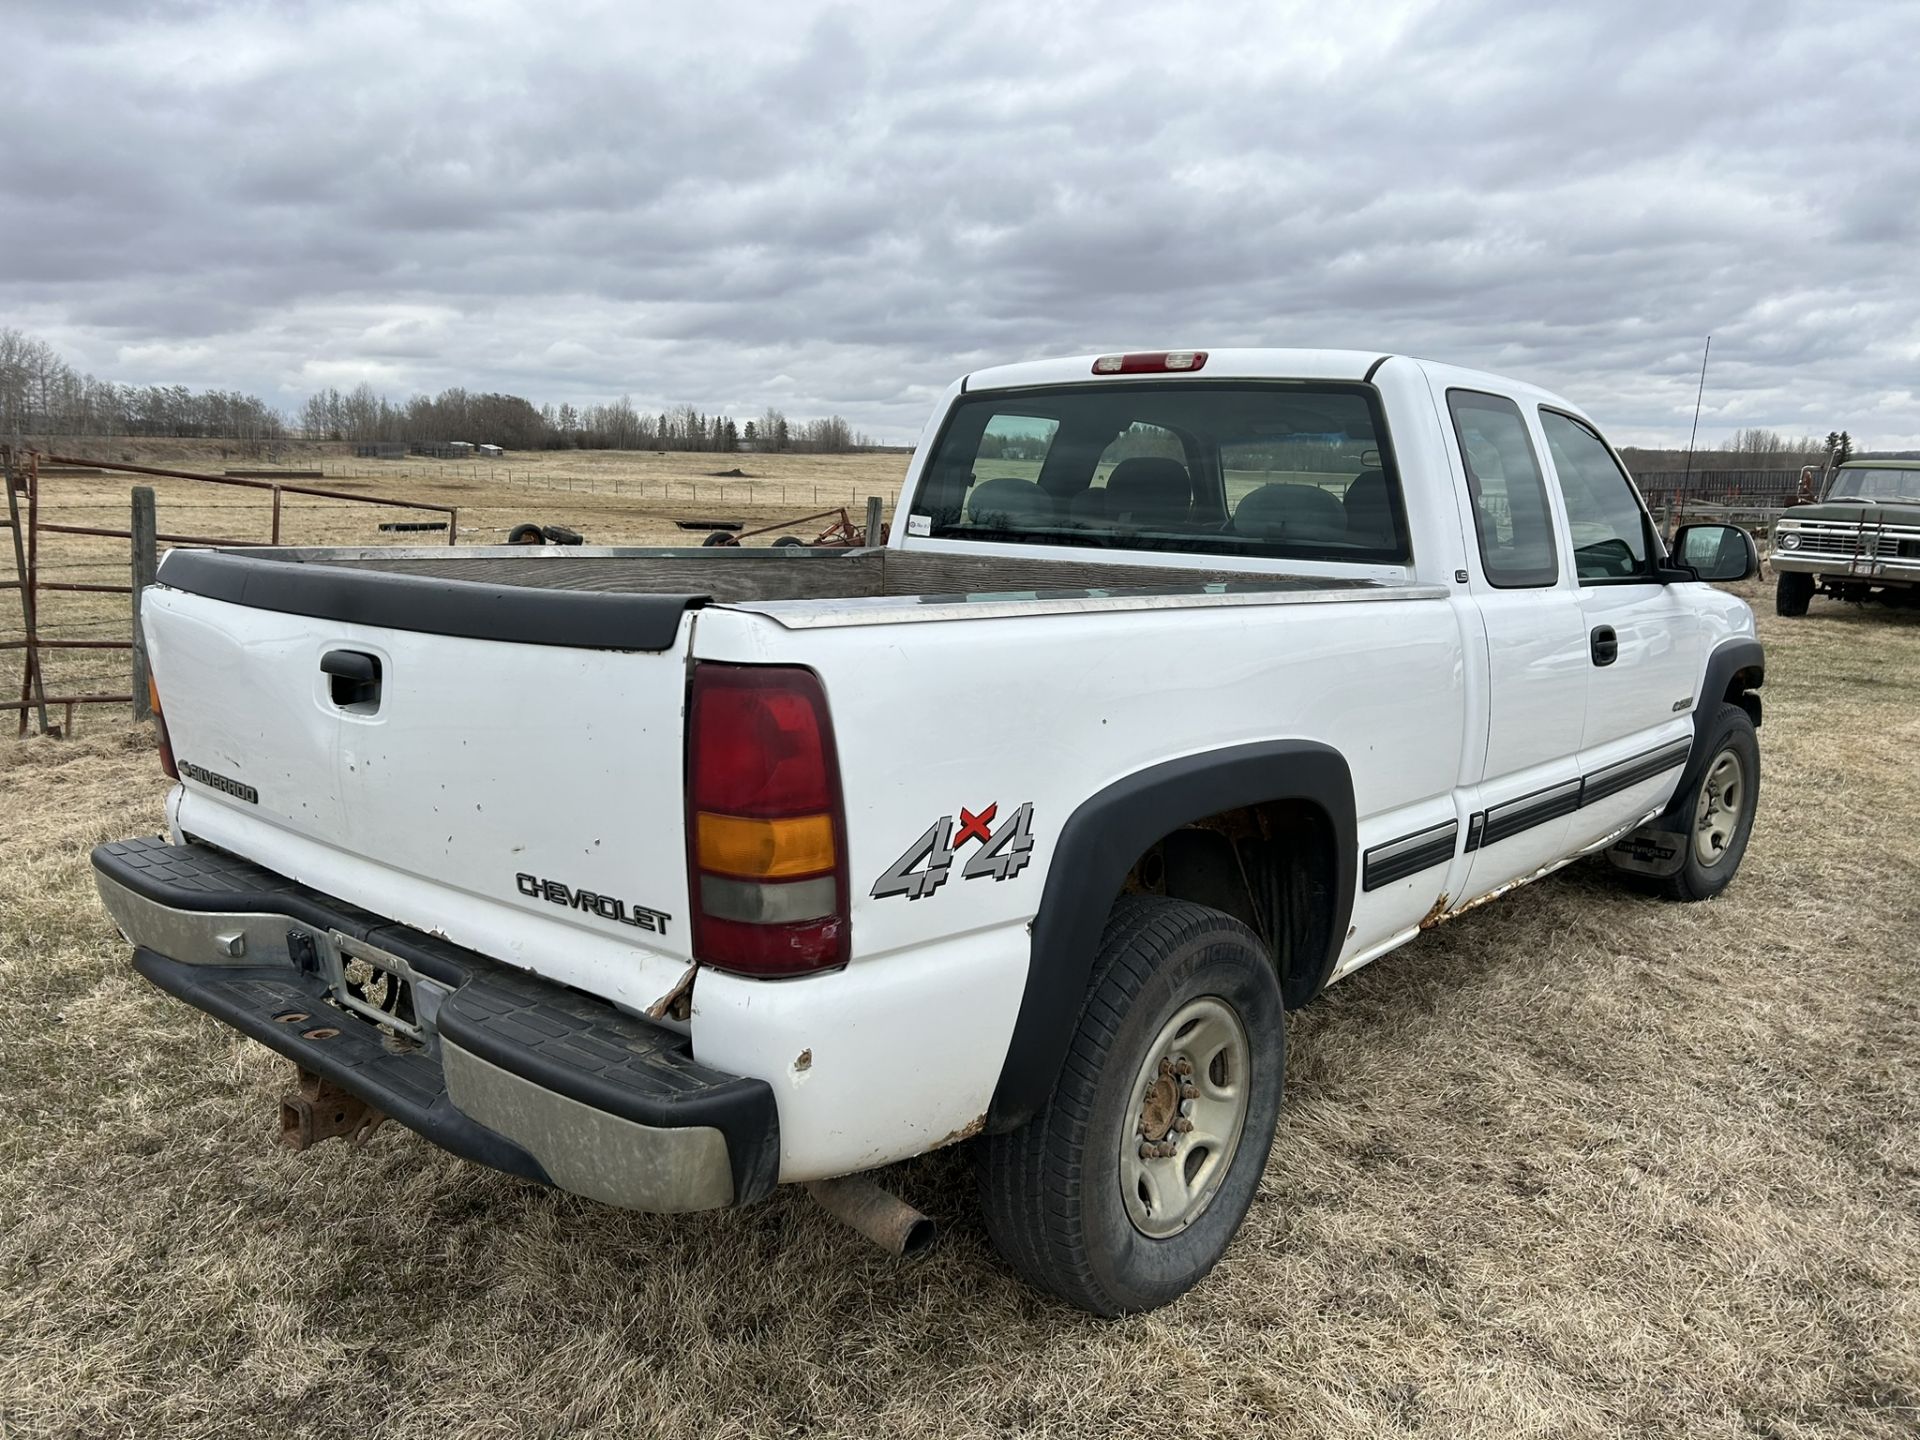 2001 CHEVROLET 2500 LS P/U TRUCK, EXTENDED CAB, SHORTS BOX, V8, 4WD, AT, 333,705 KM'S SHOWING - Image 4 of 11